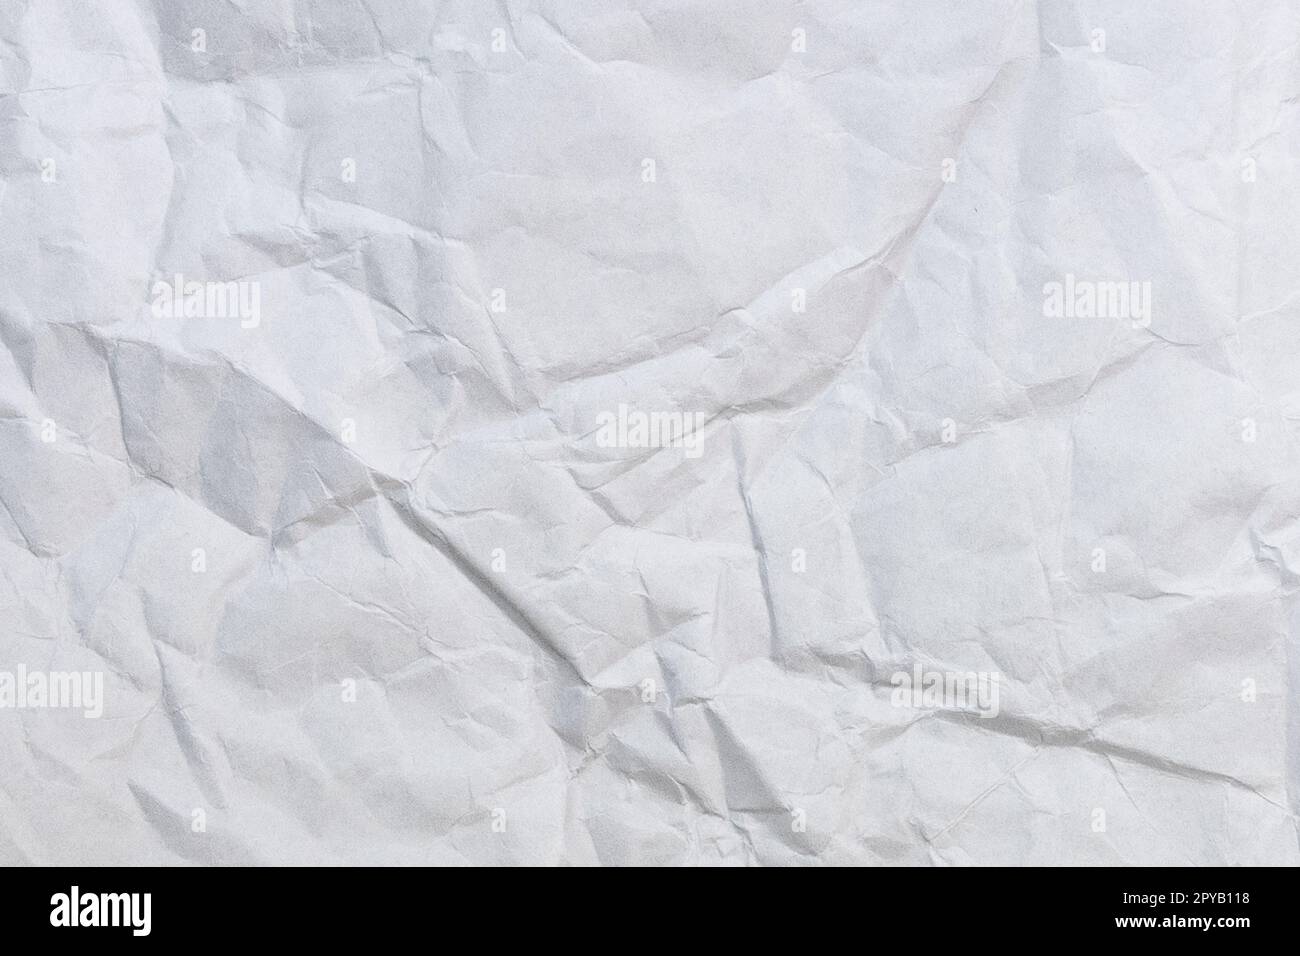 Textured Blank Crumpled Paper Of White Color Stock Photo